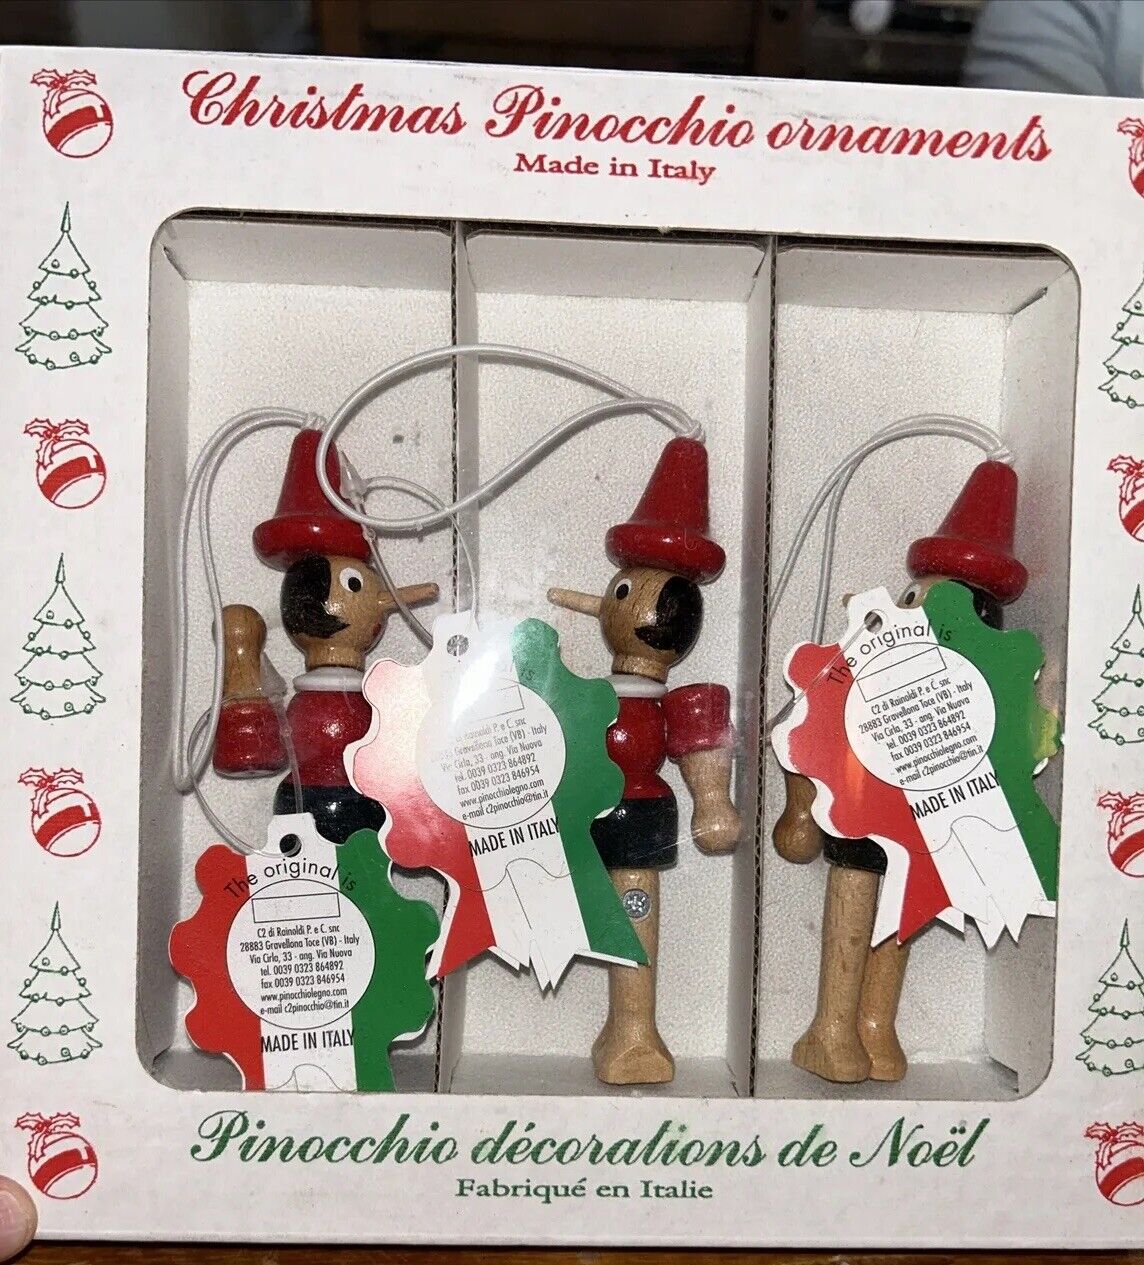 Wooden Pinocchio Ornaments Handcrafted in Italy 4” C2 Rainoldi Set of 3